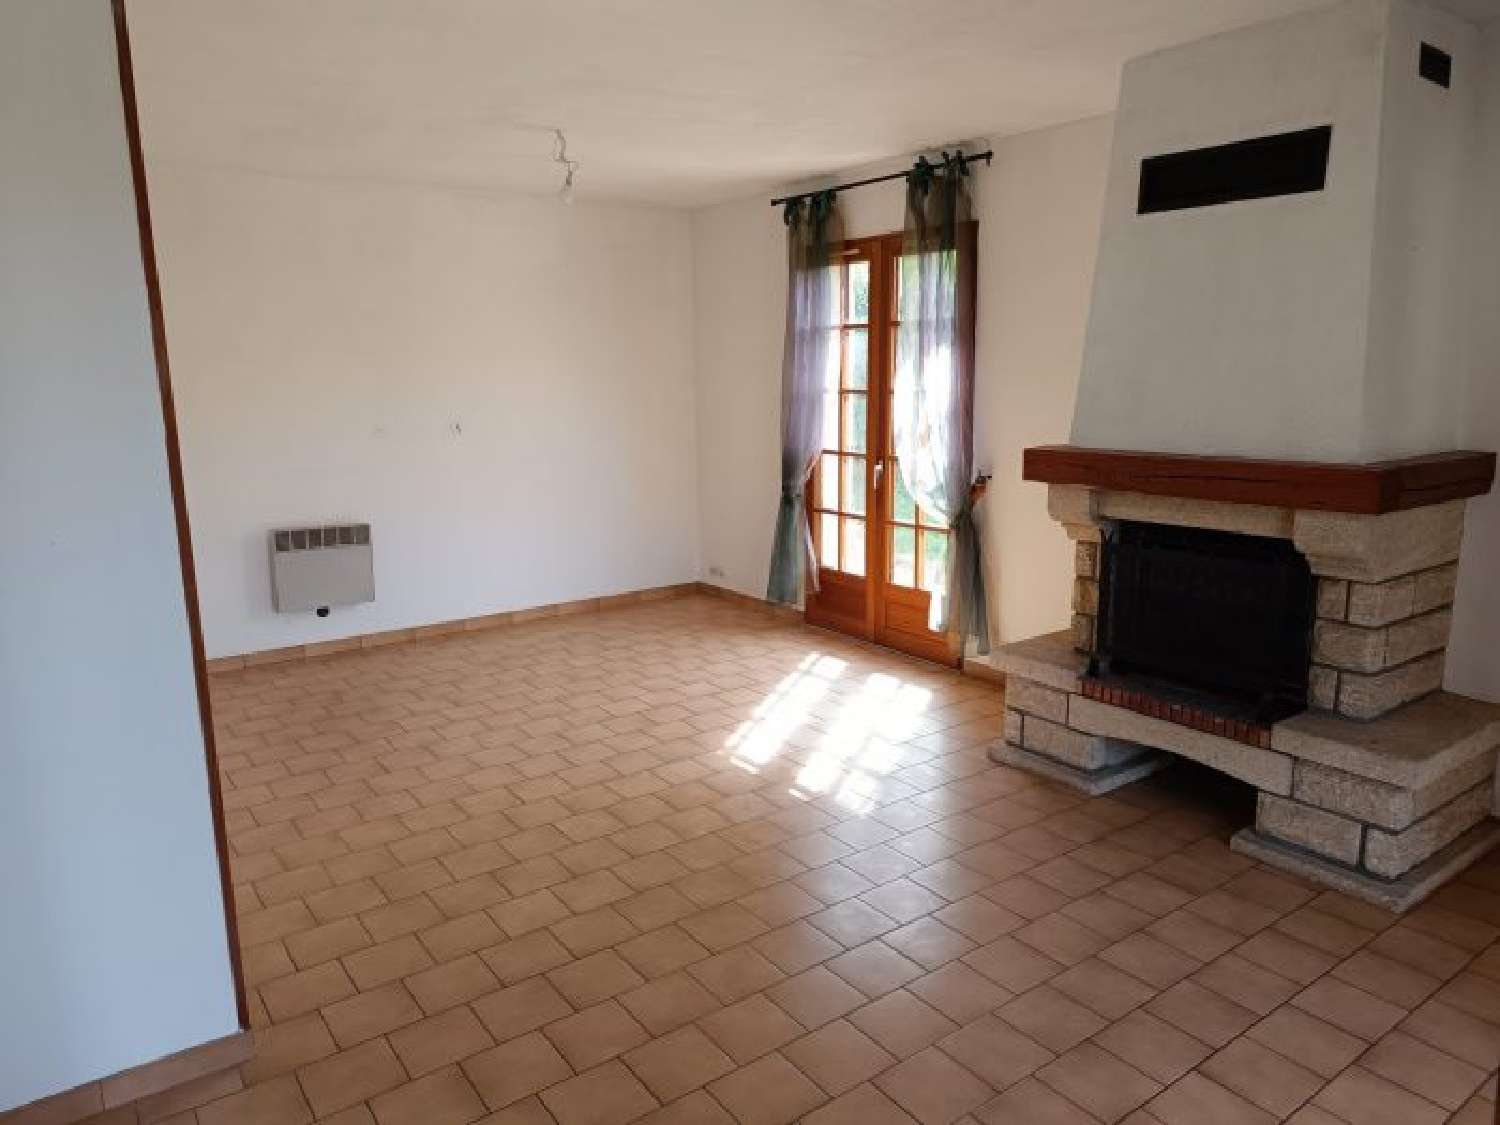  for sale house Guichainville Eure 3